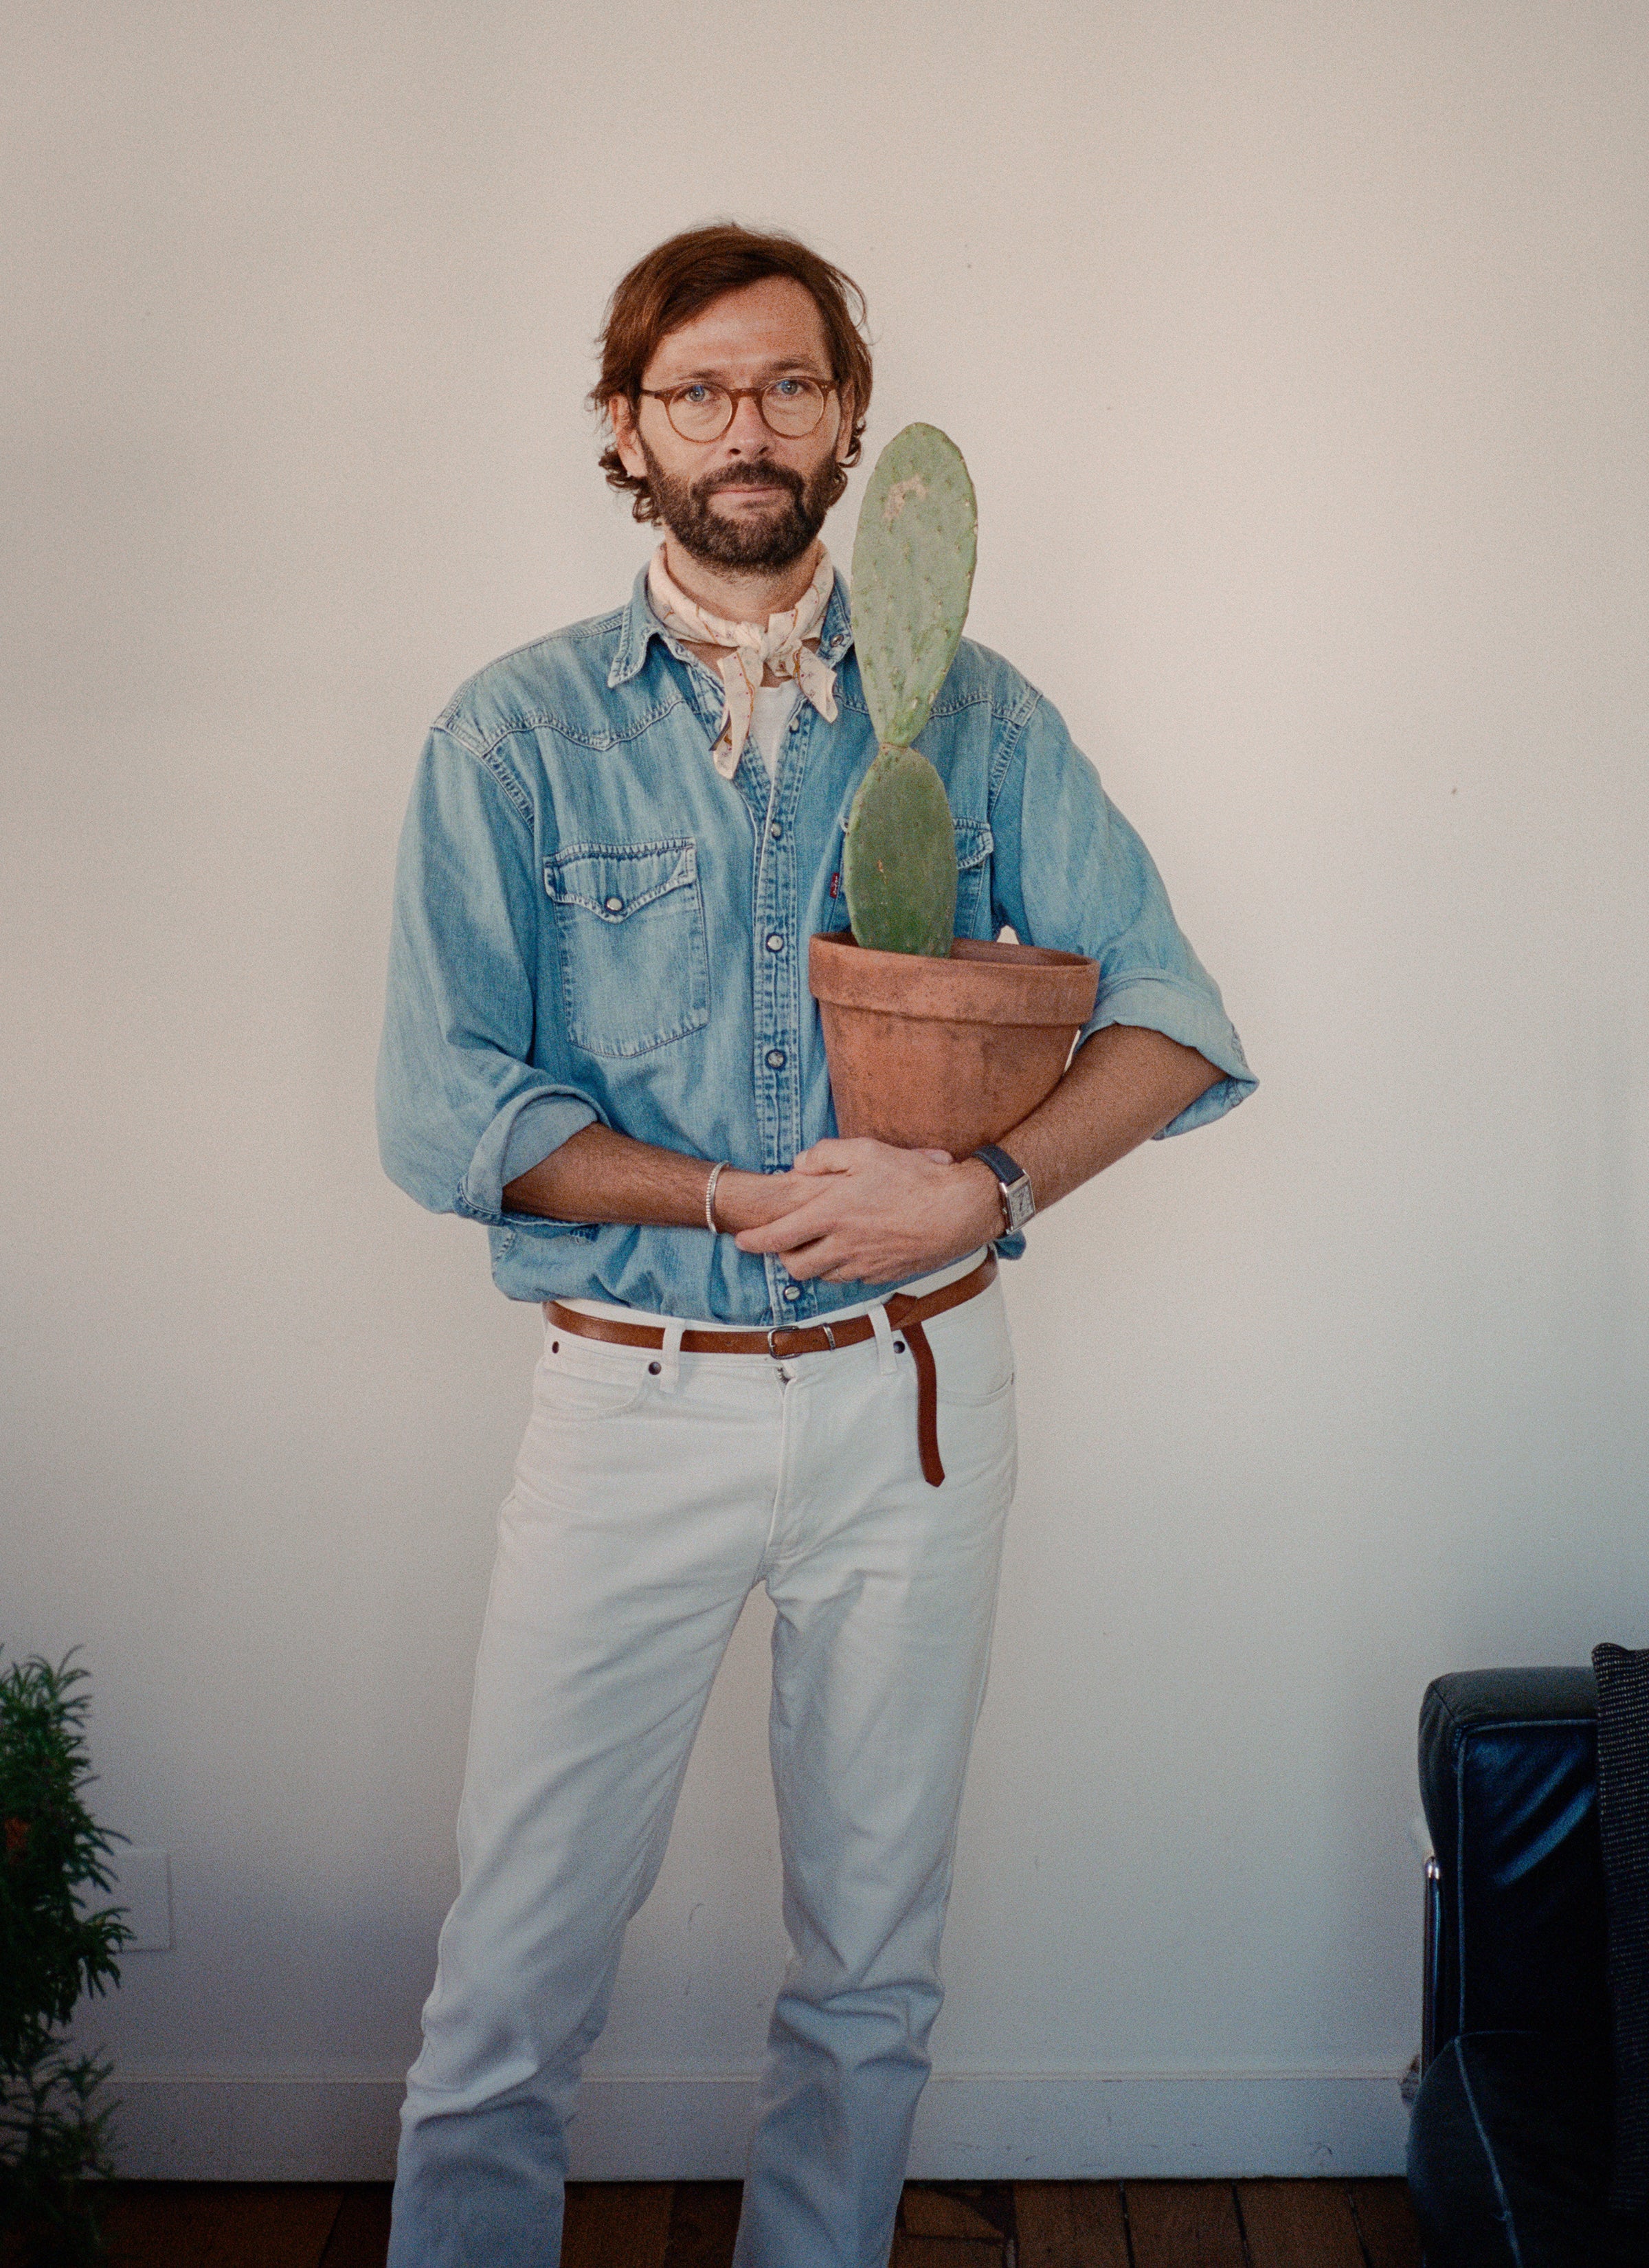 Mathias standing in front of the white wall holding a pot of cactus in a terracotta pot.